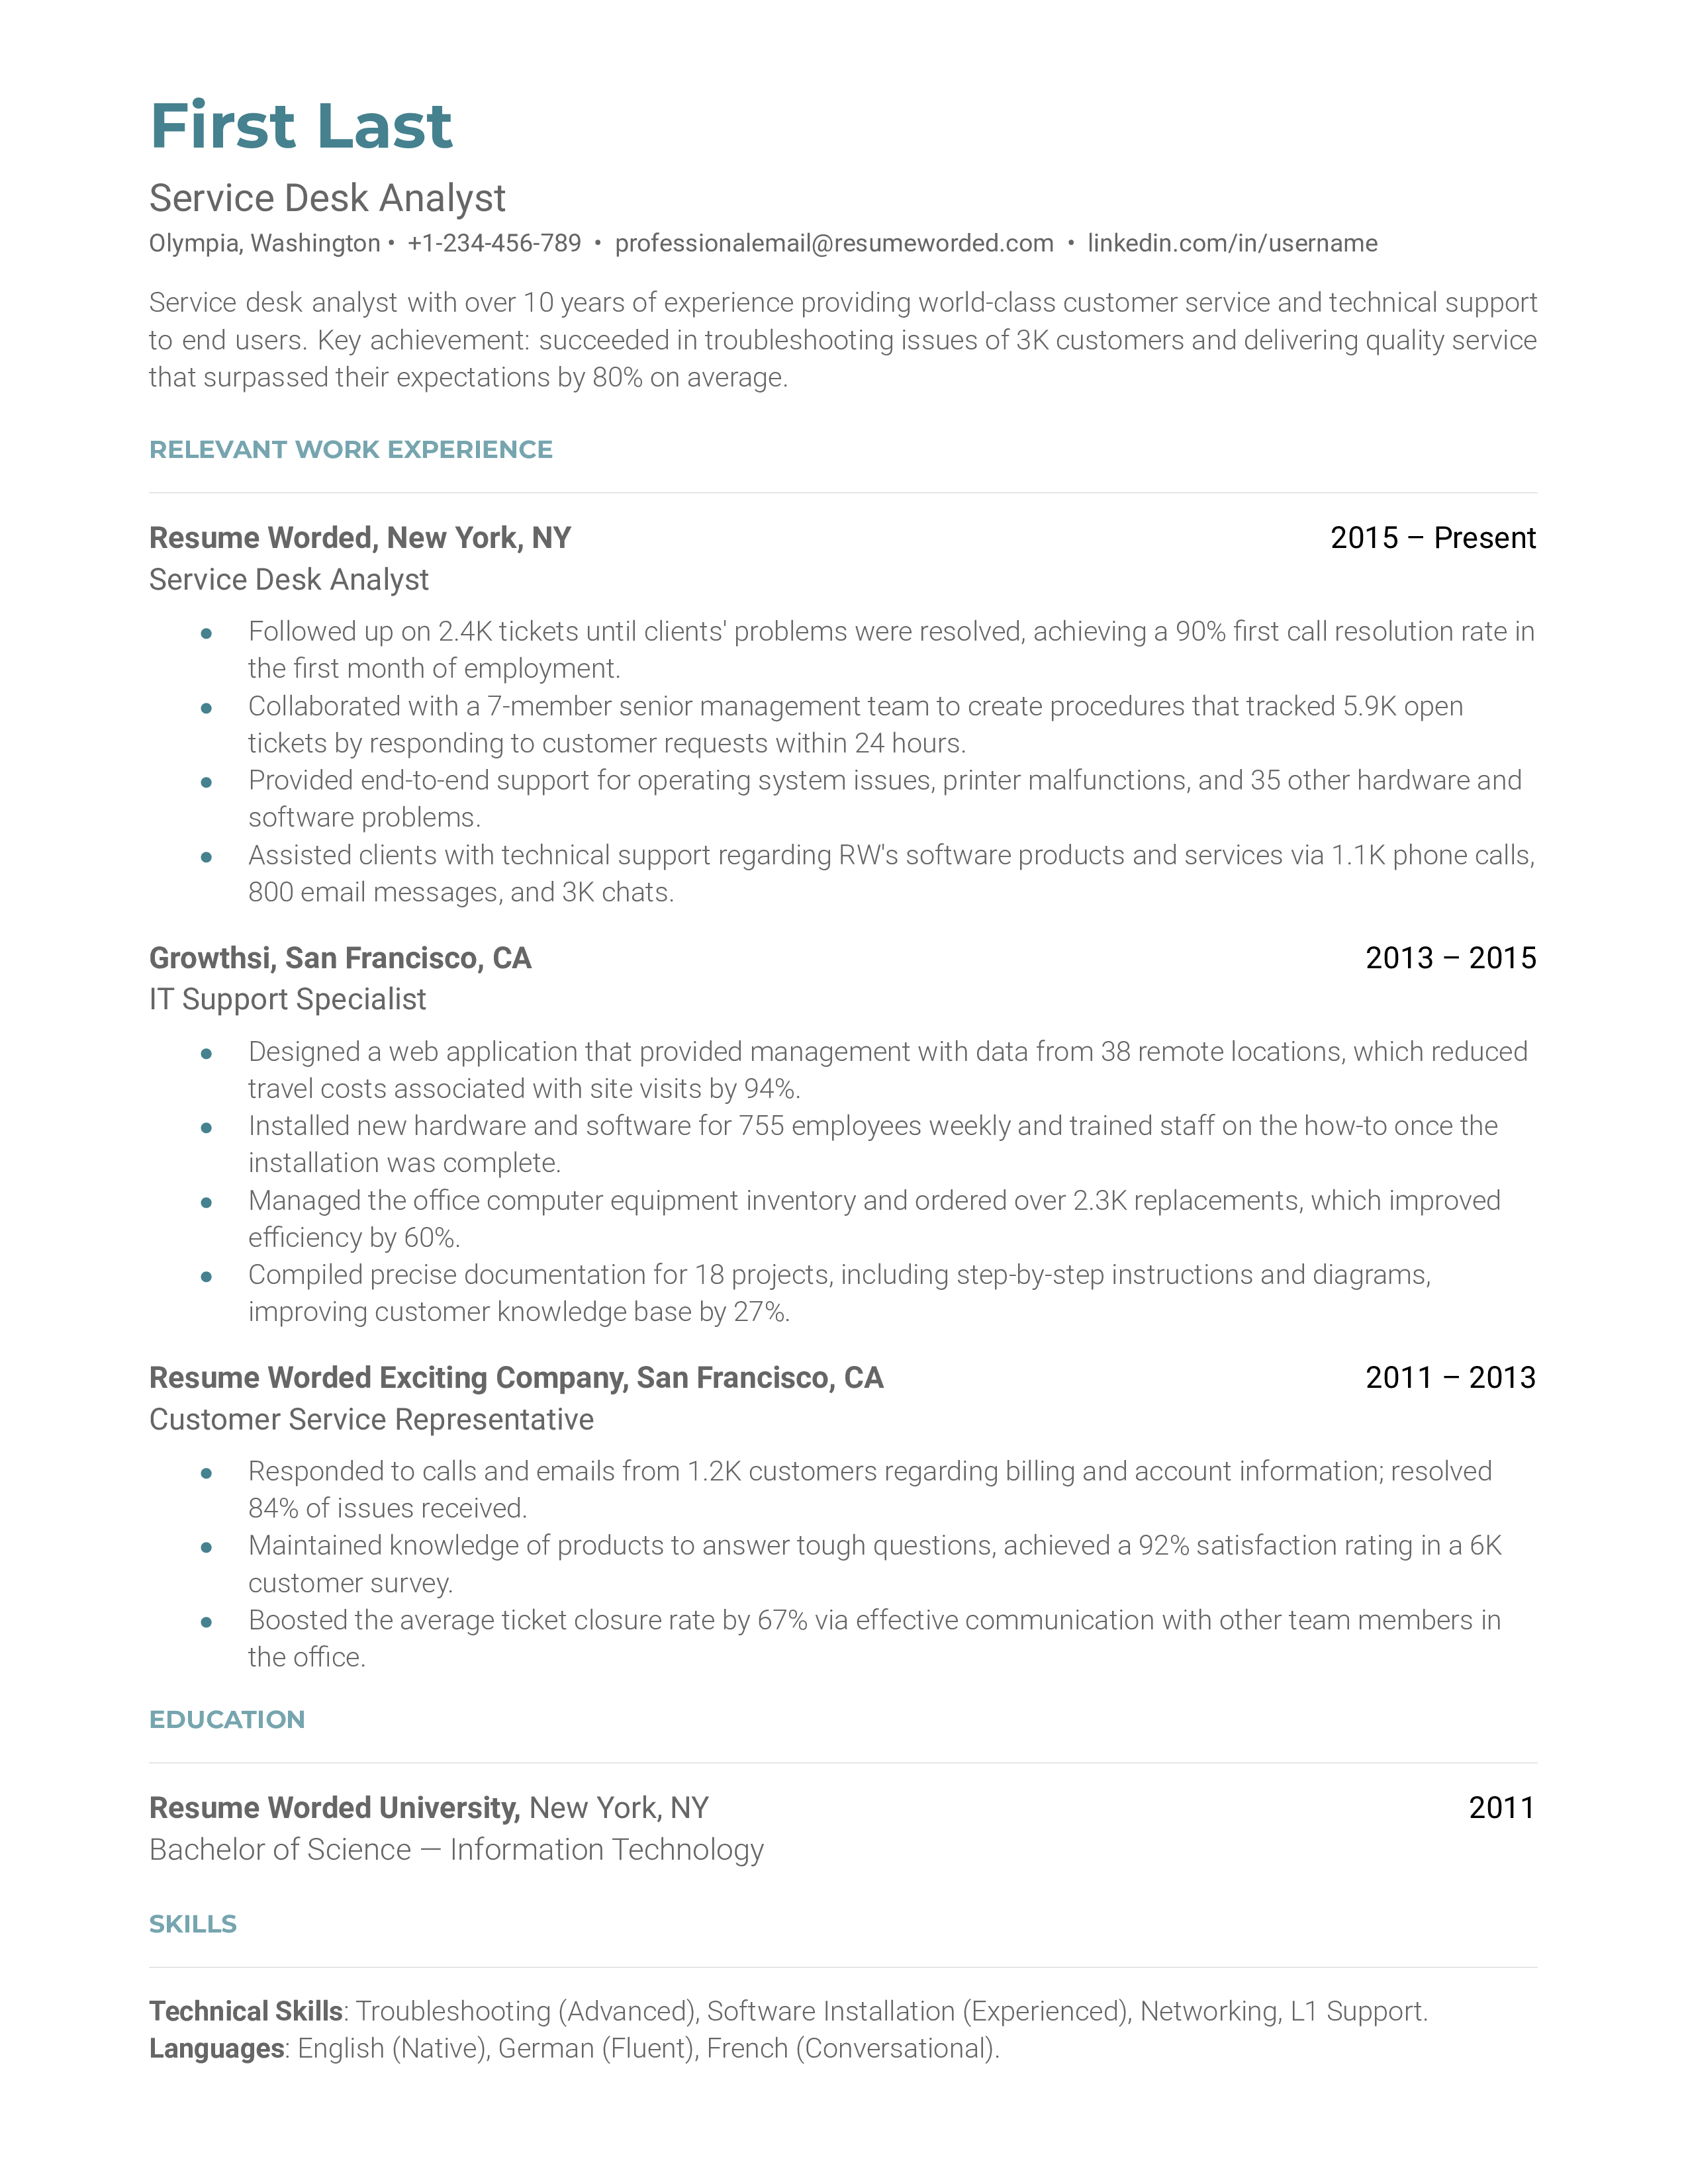 A service desk analyst resume template including a brief description and relevant work experience